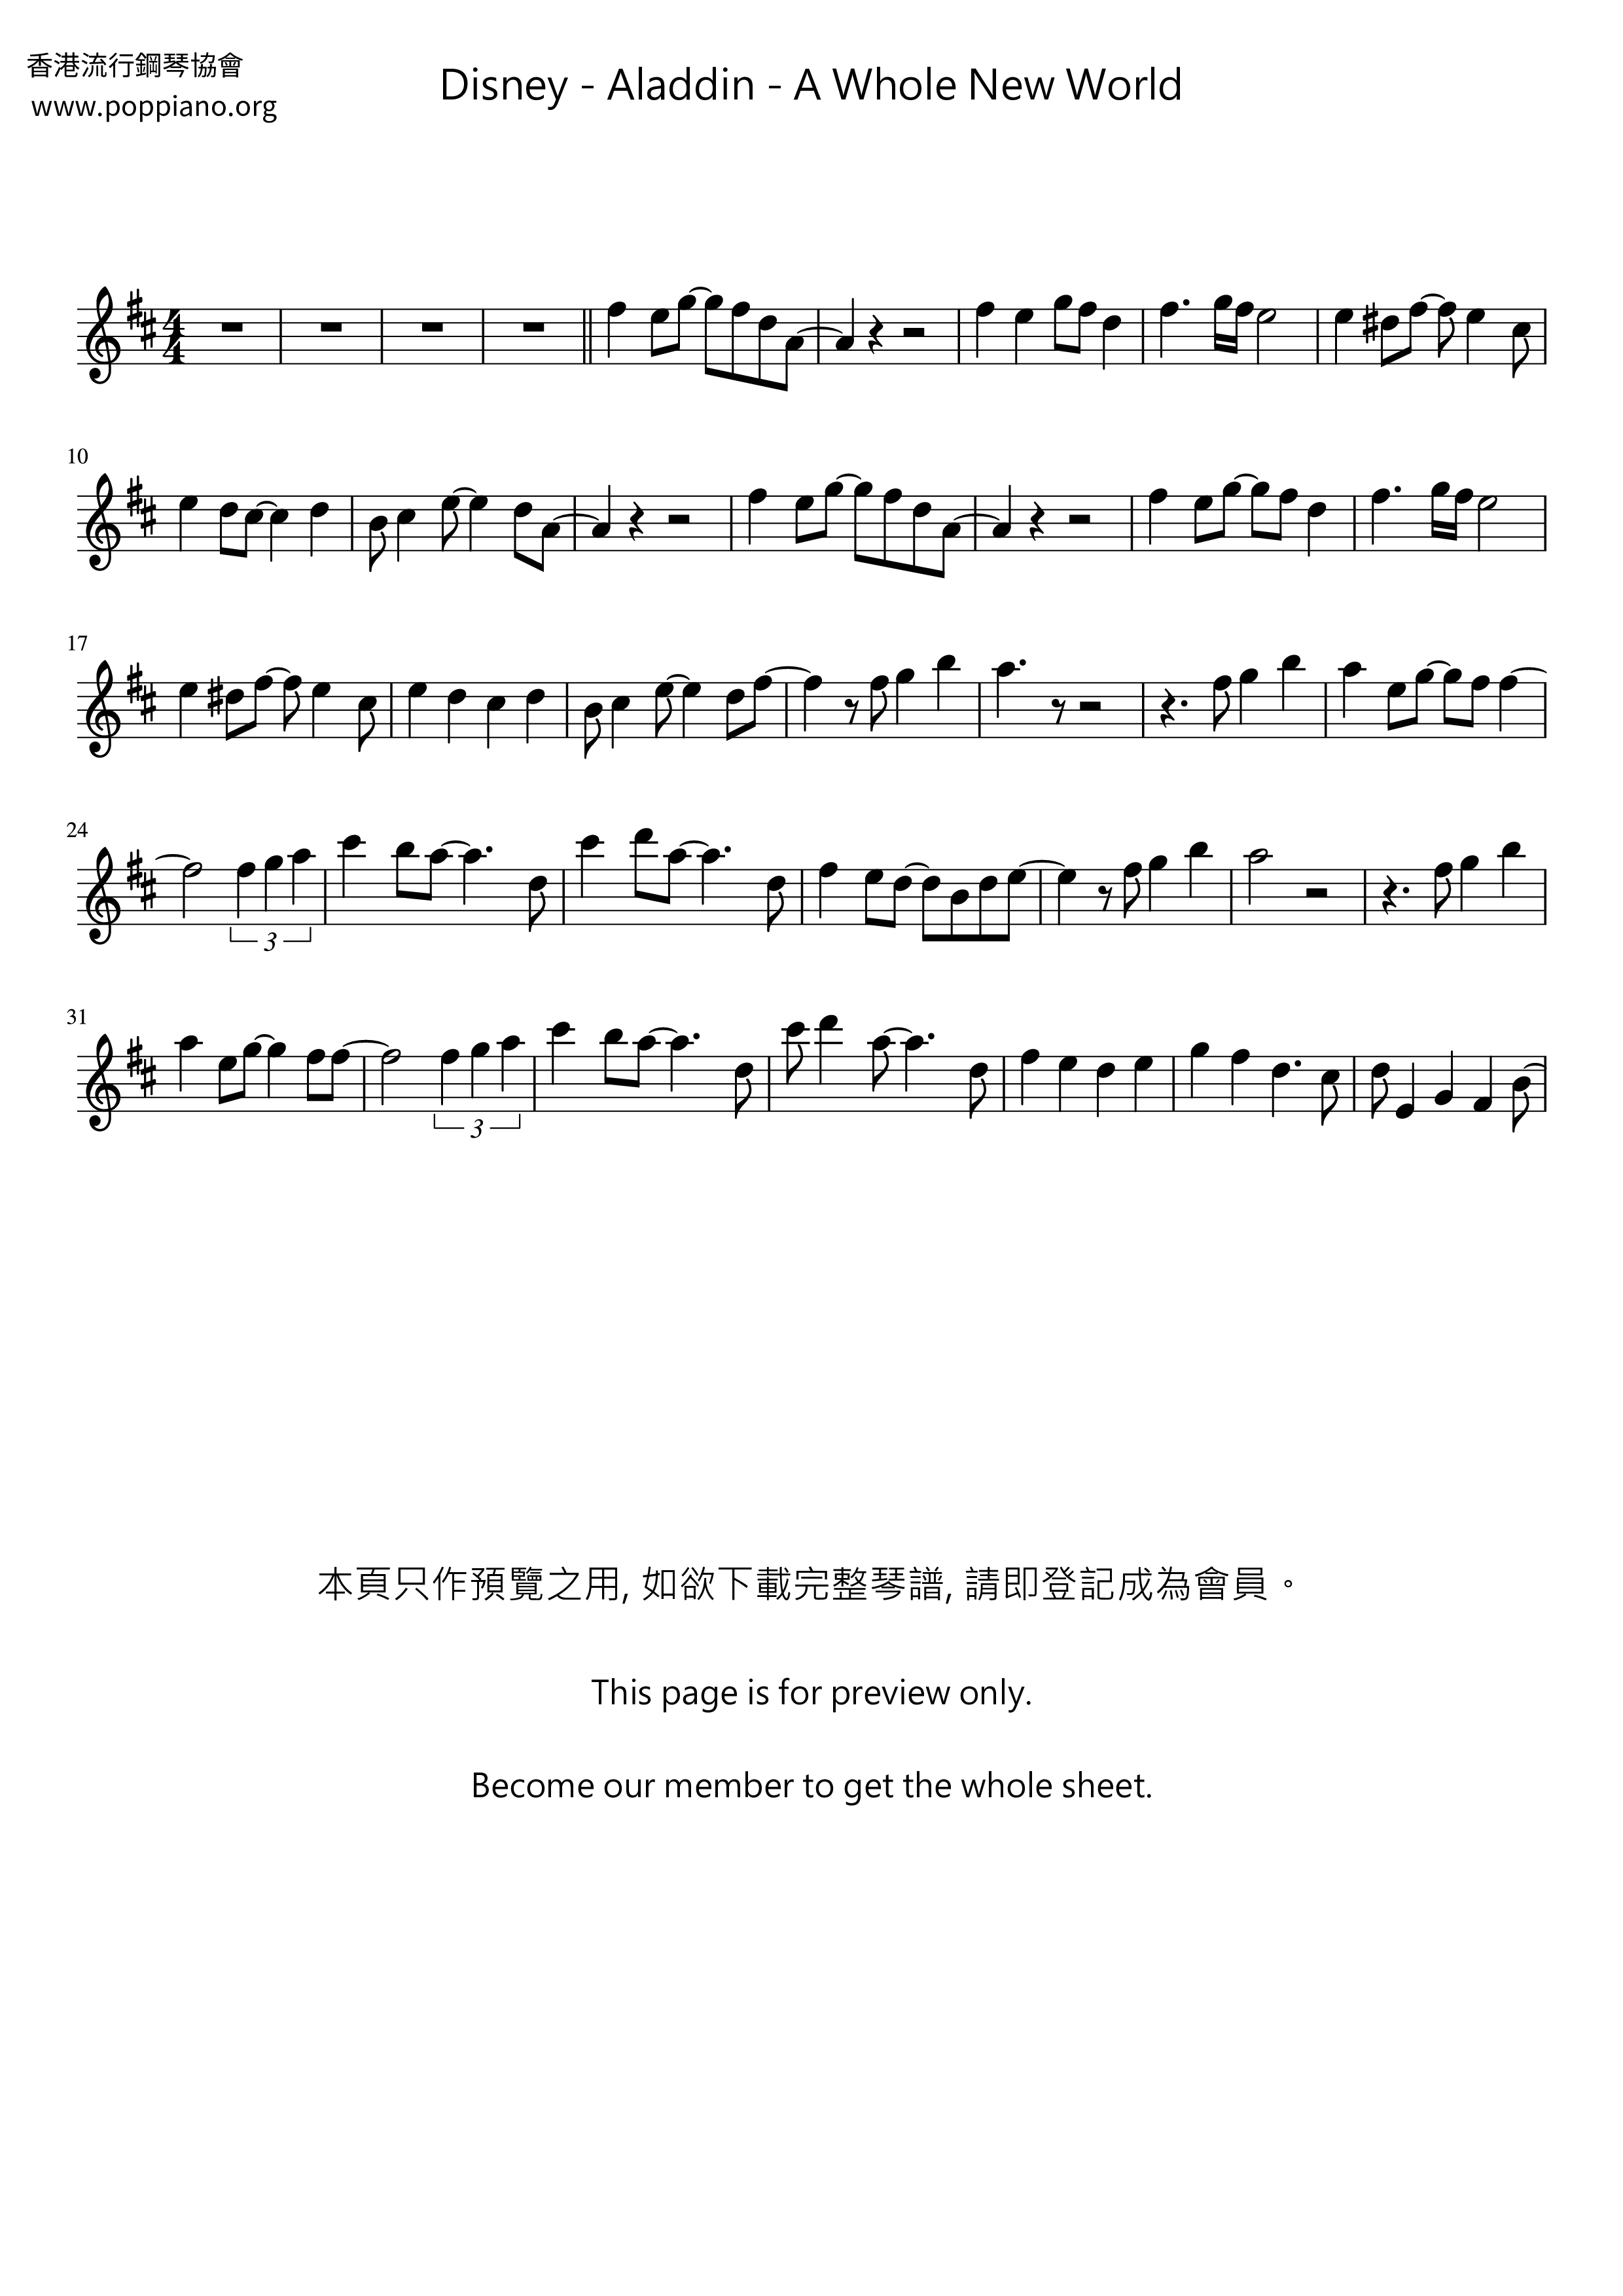 A Whole New World (End Title) - From Aladdin琴譜